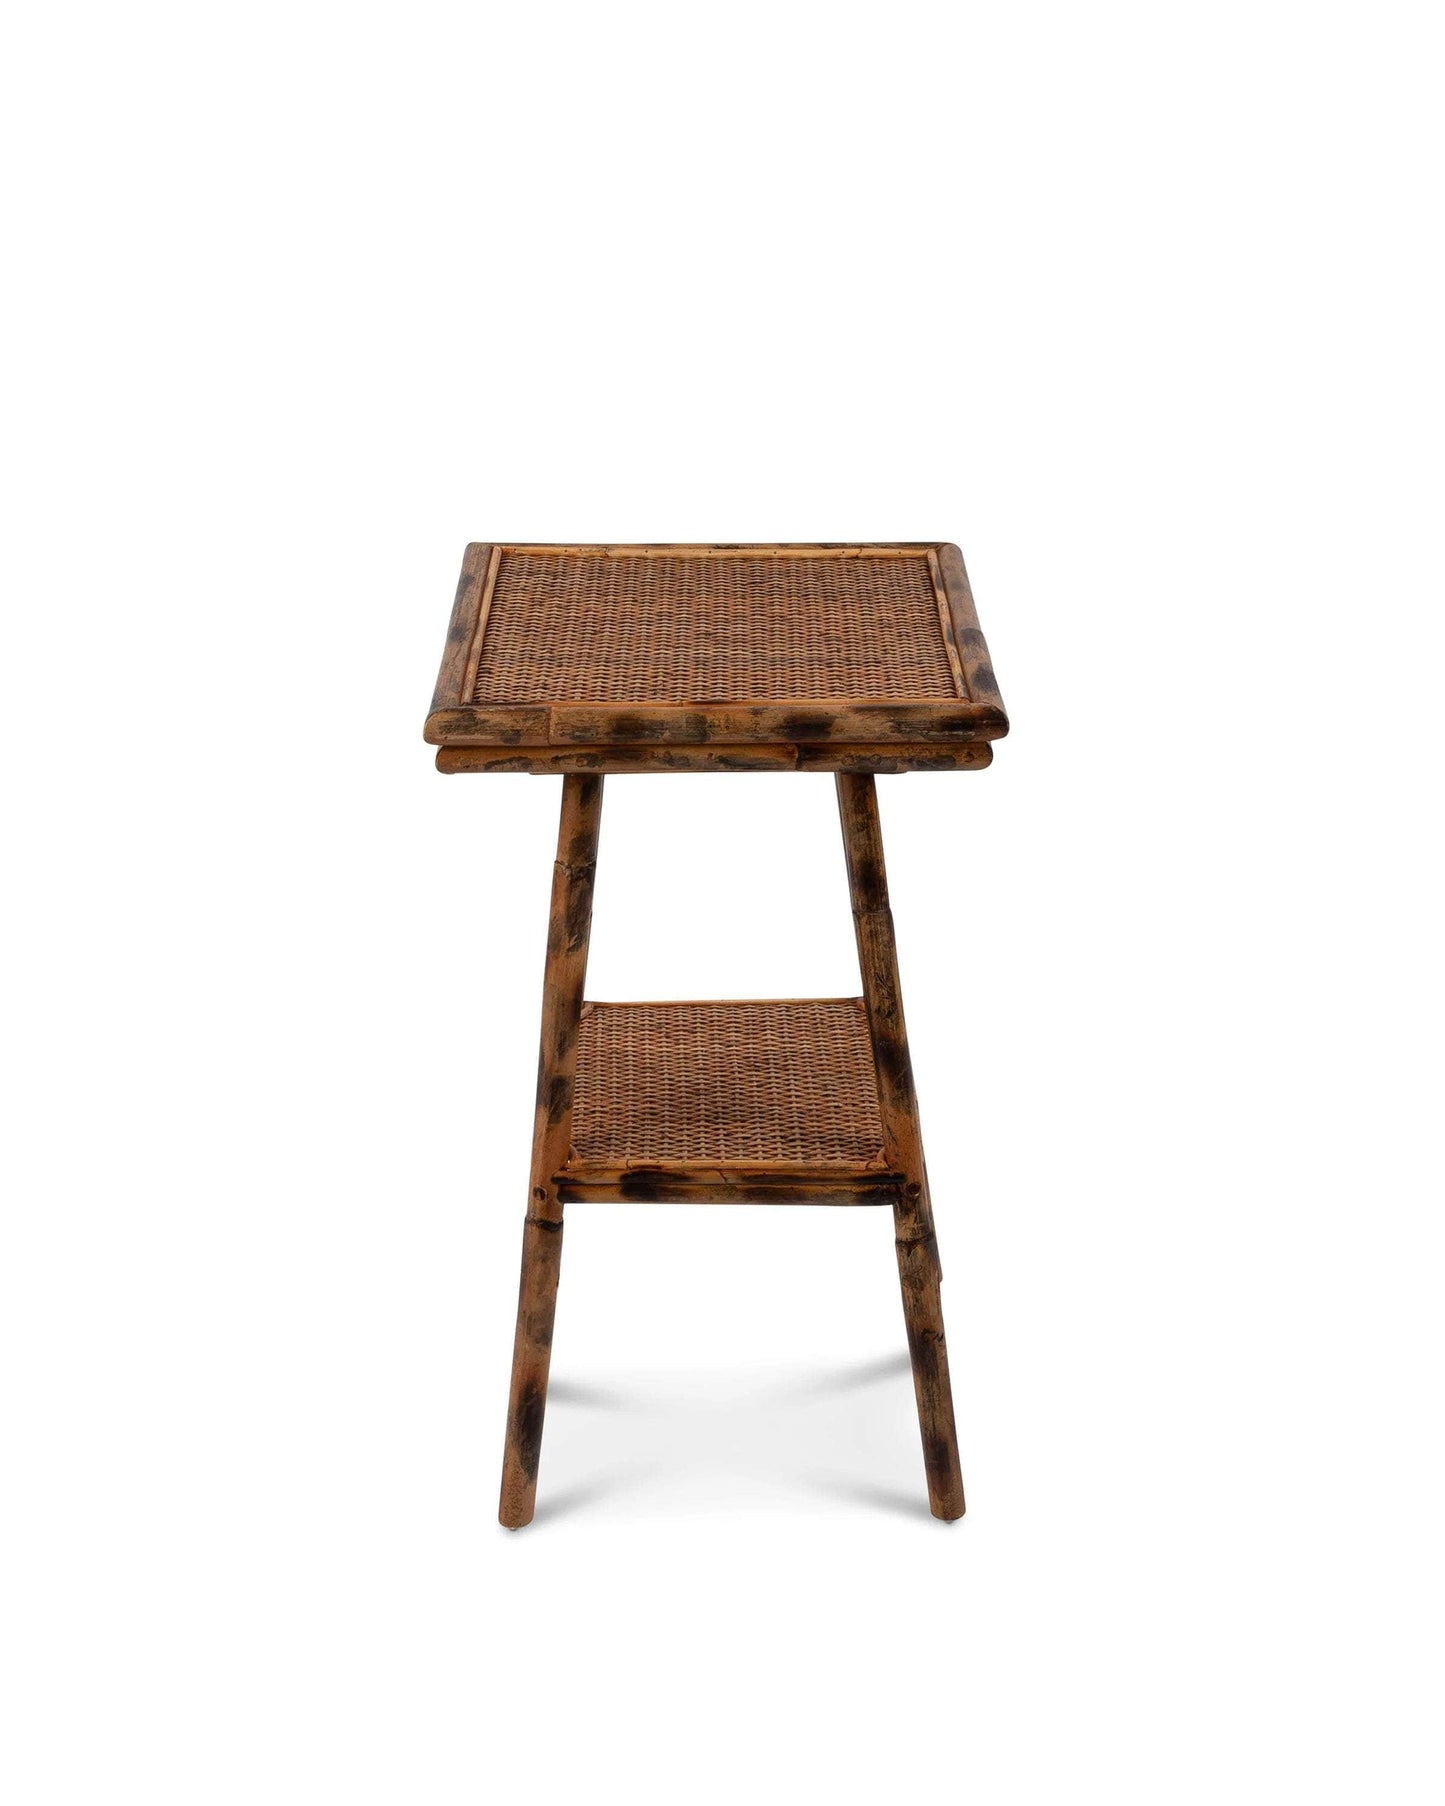 Pimlico Bamboo Side Table